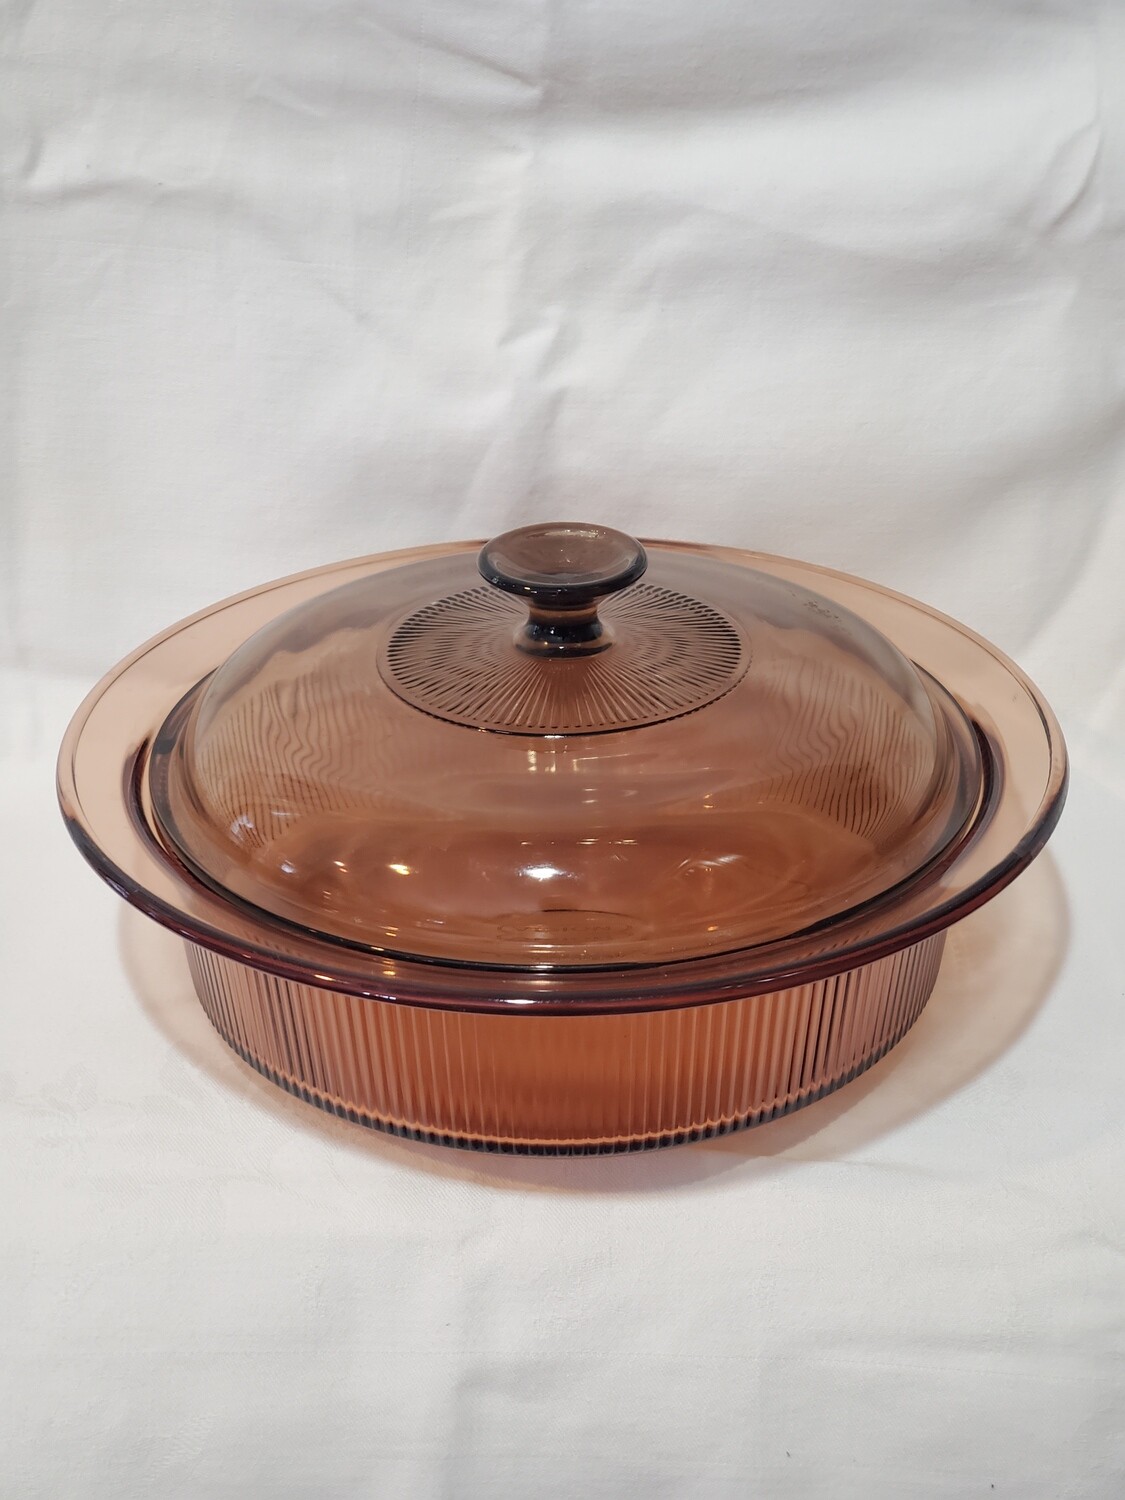 Visions, Microwave Casserole 2.5Qt, 11 1/4" Round with Cover, Amber